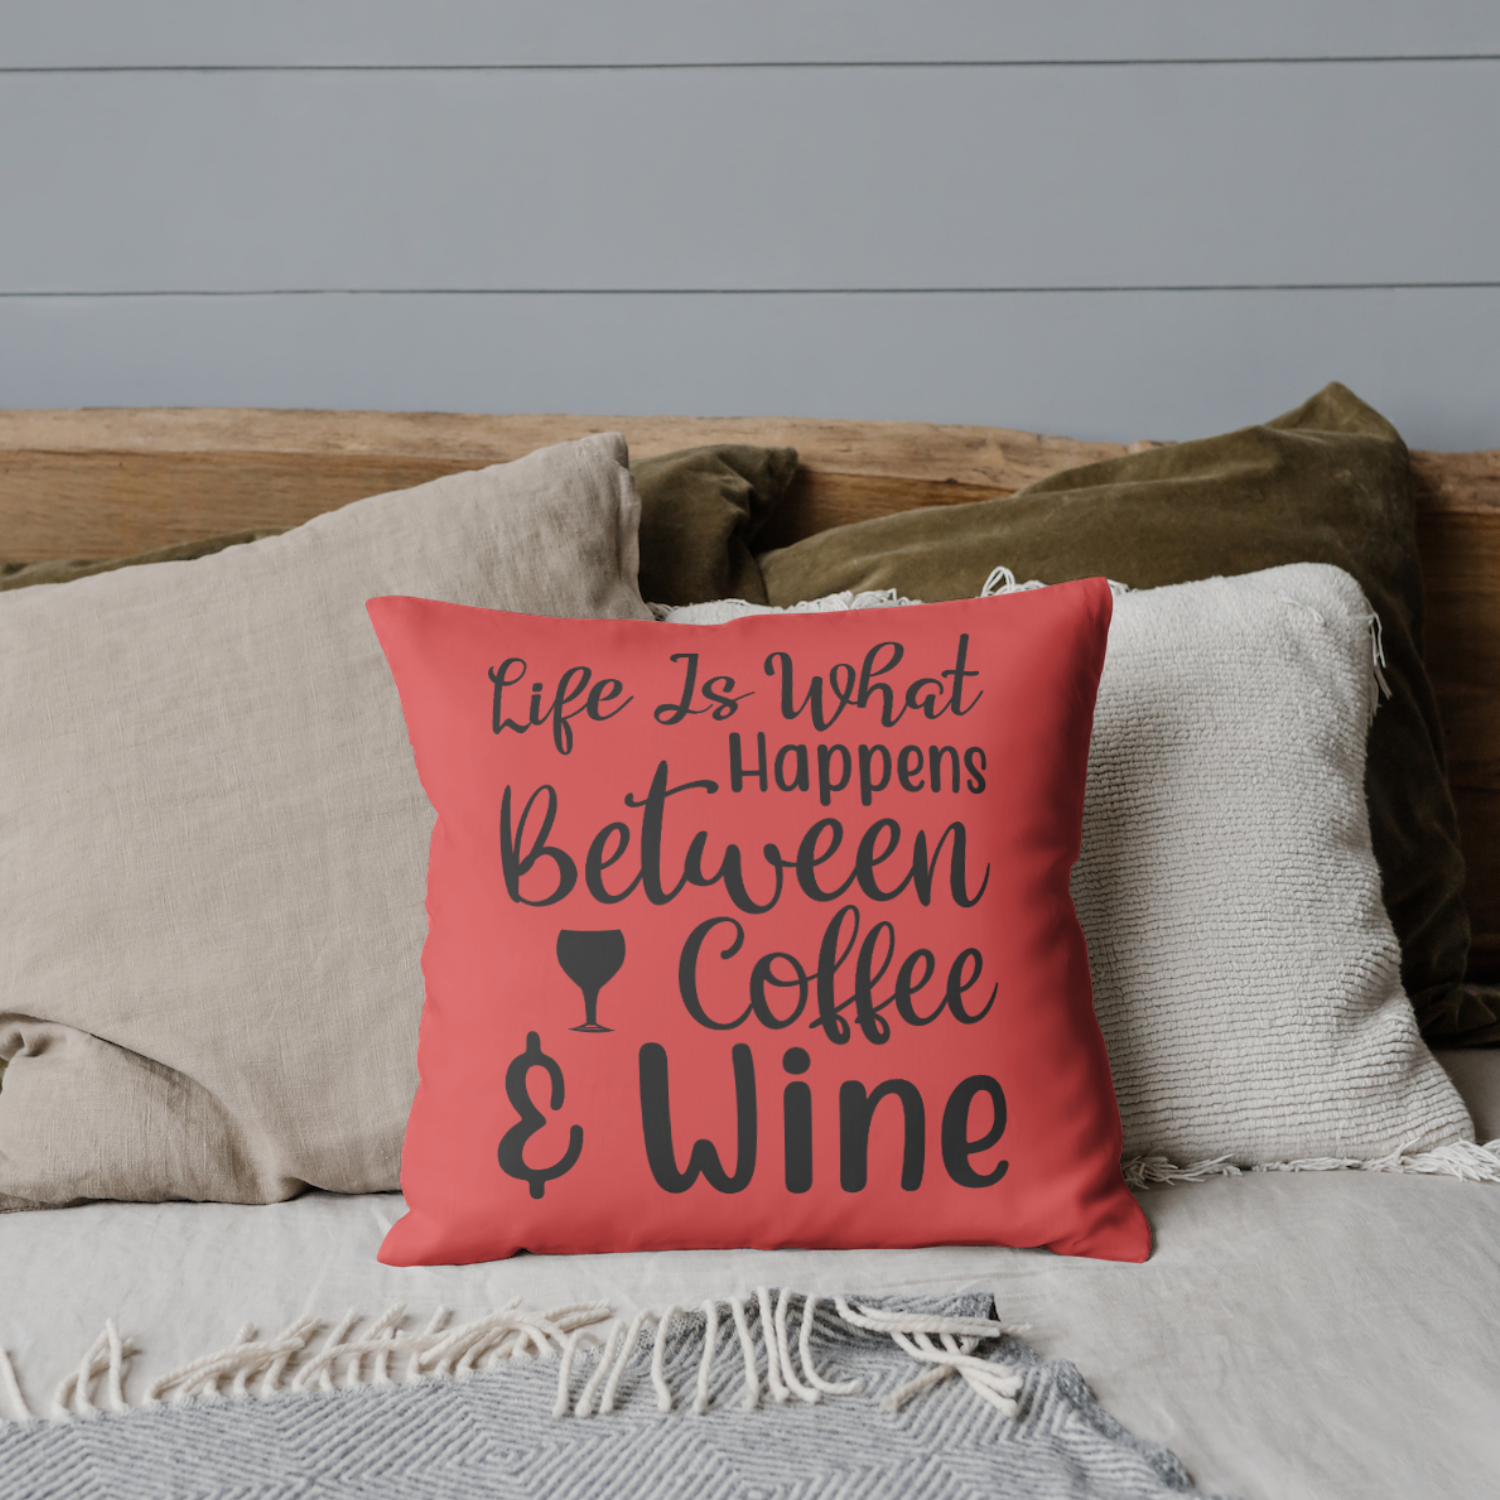 Life Is What Happens Between Coffee and Wine SVG | Digital Download | Cut File | SVG